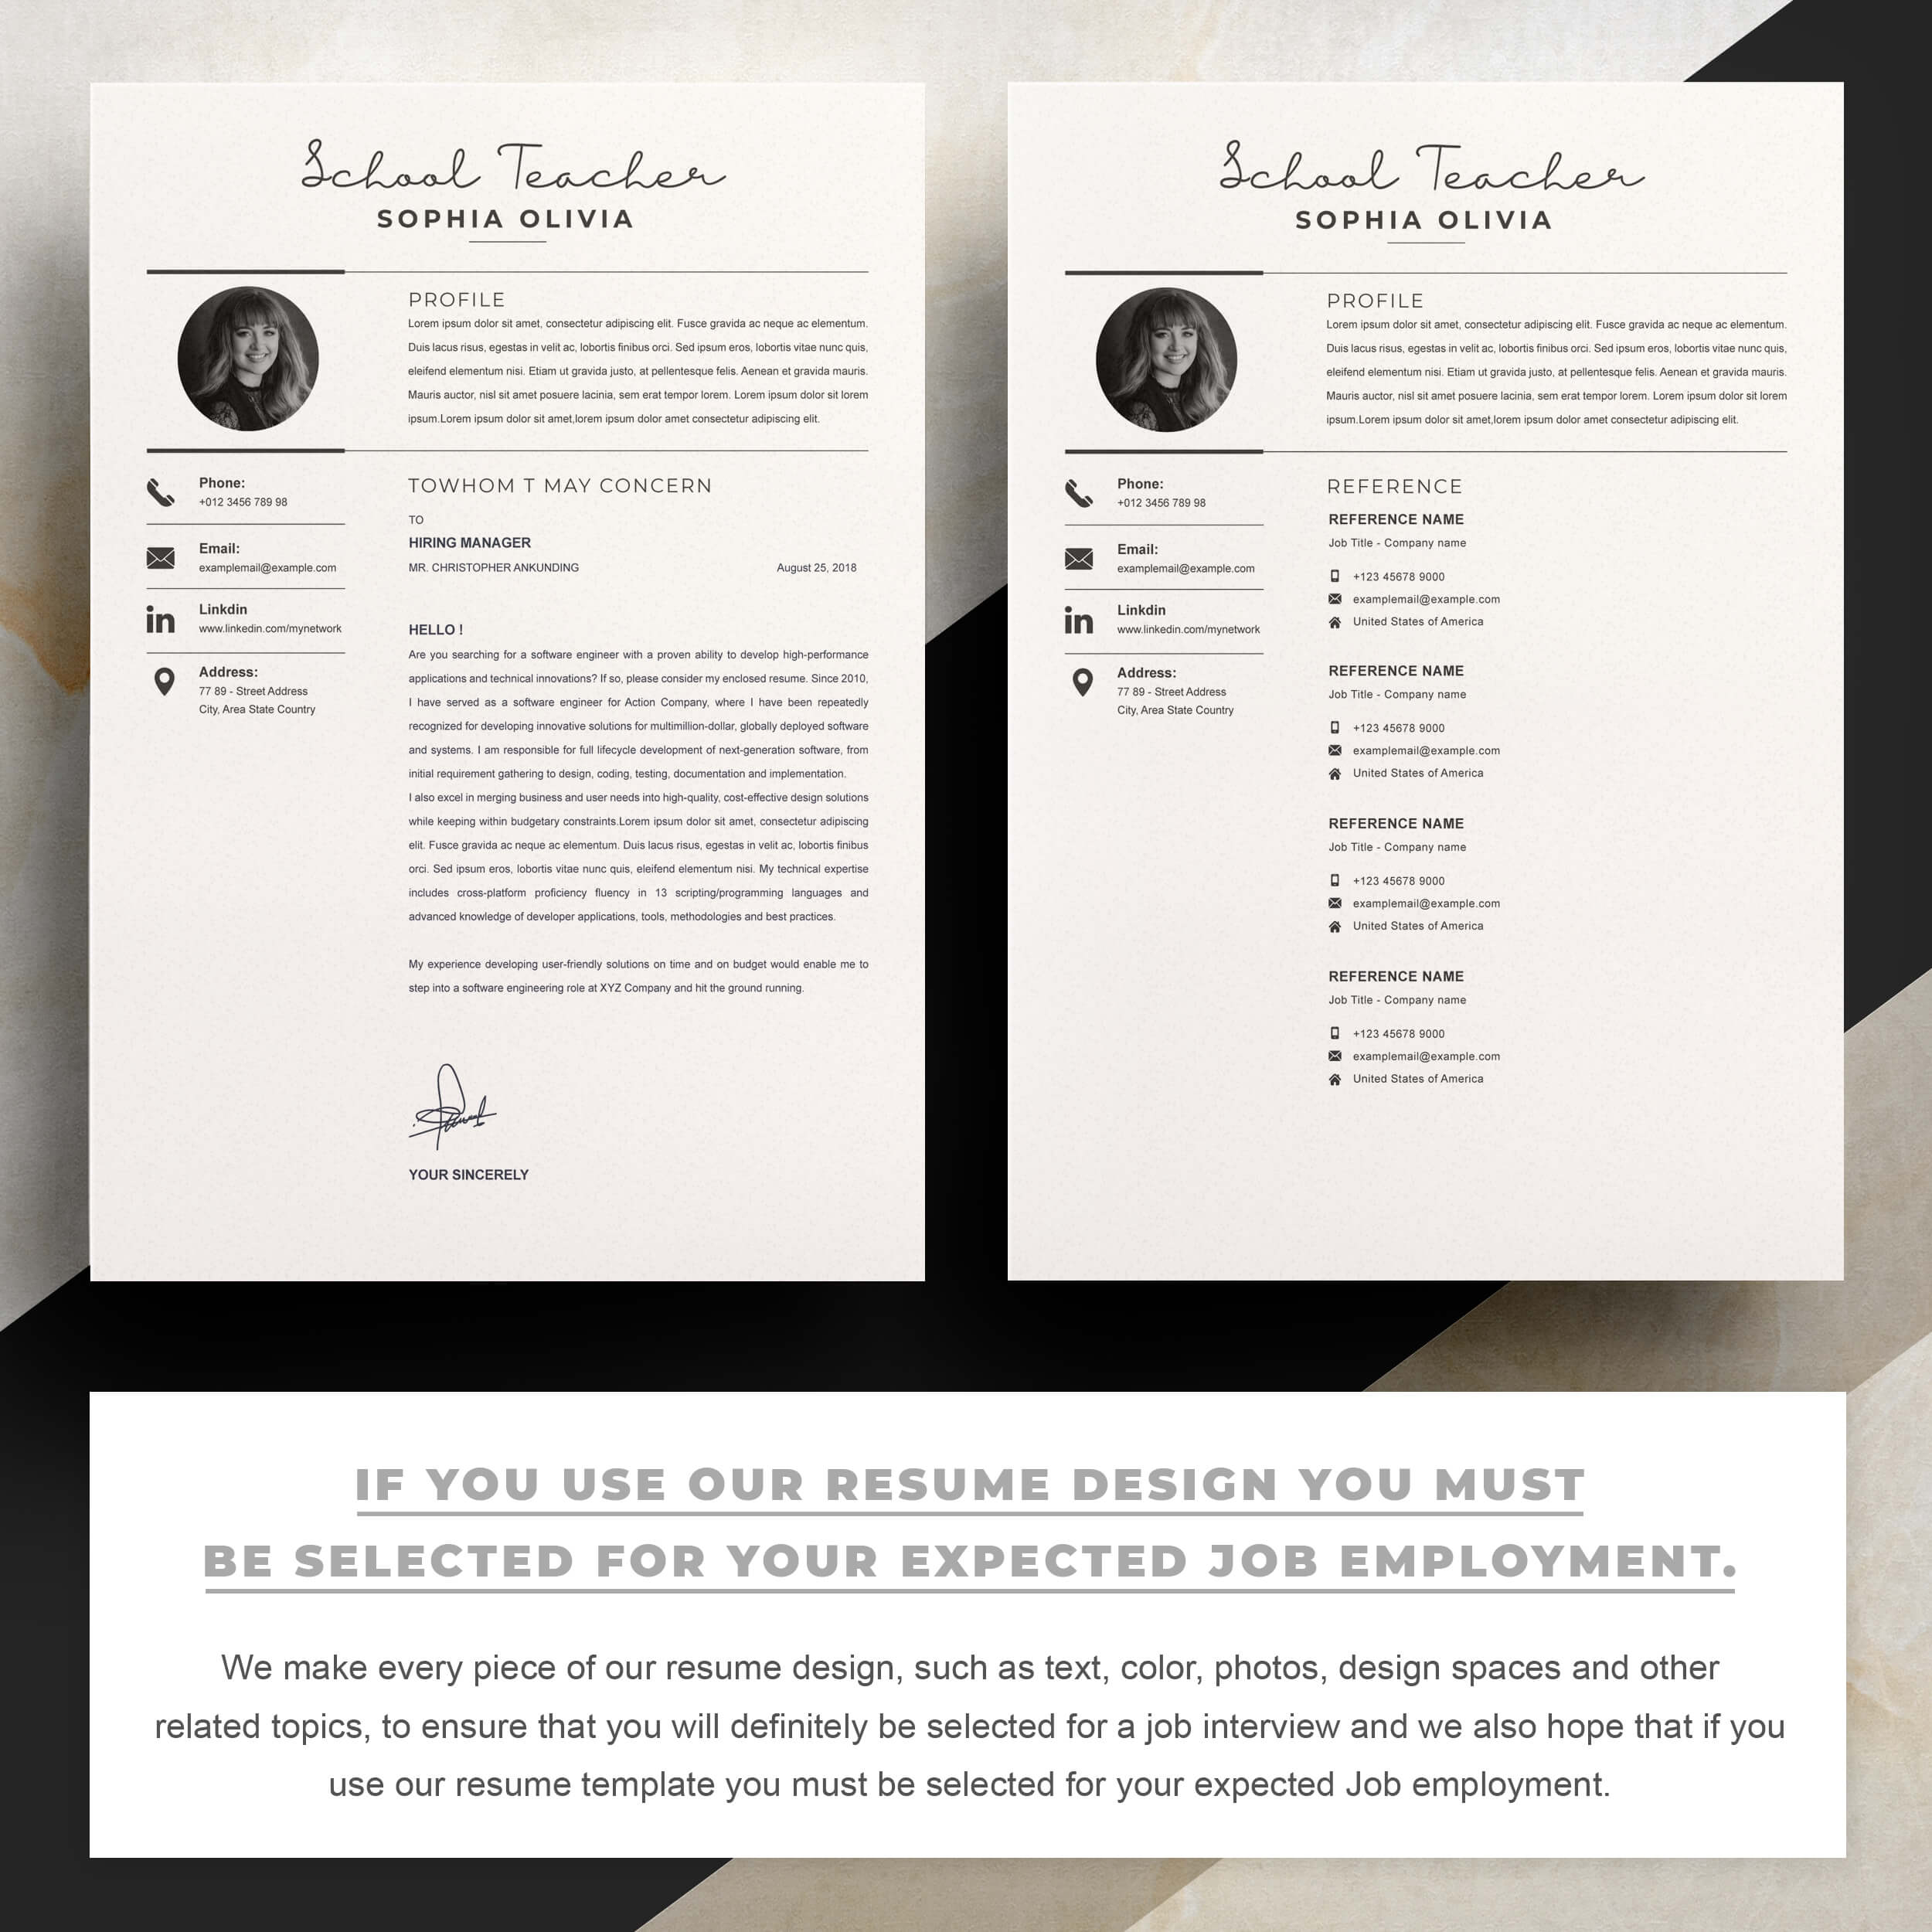 03 2 pages free resume design template 2 660